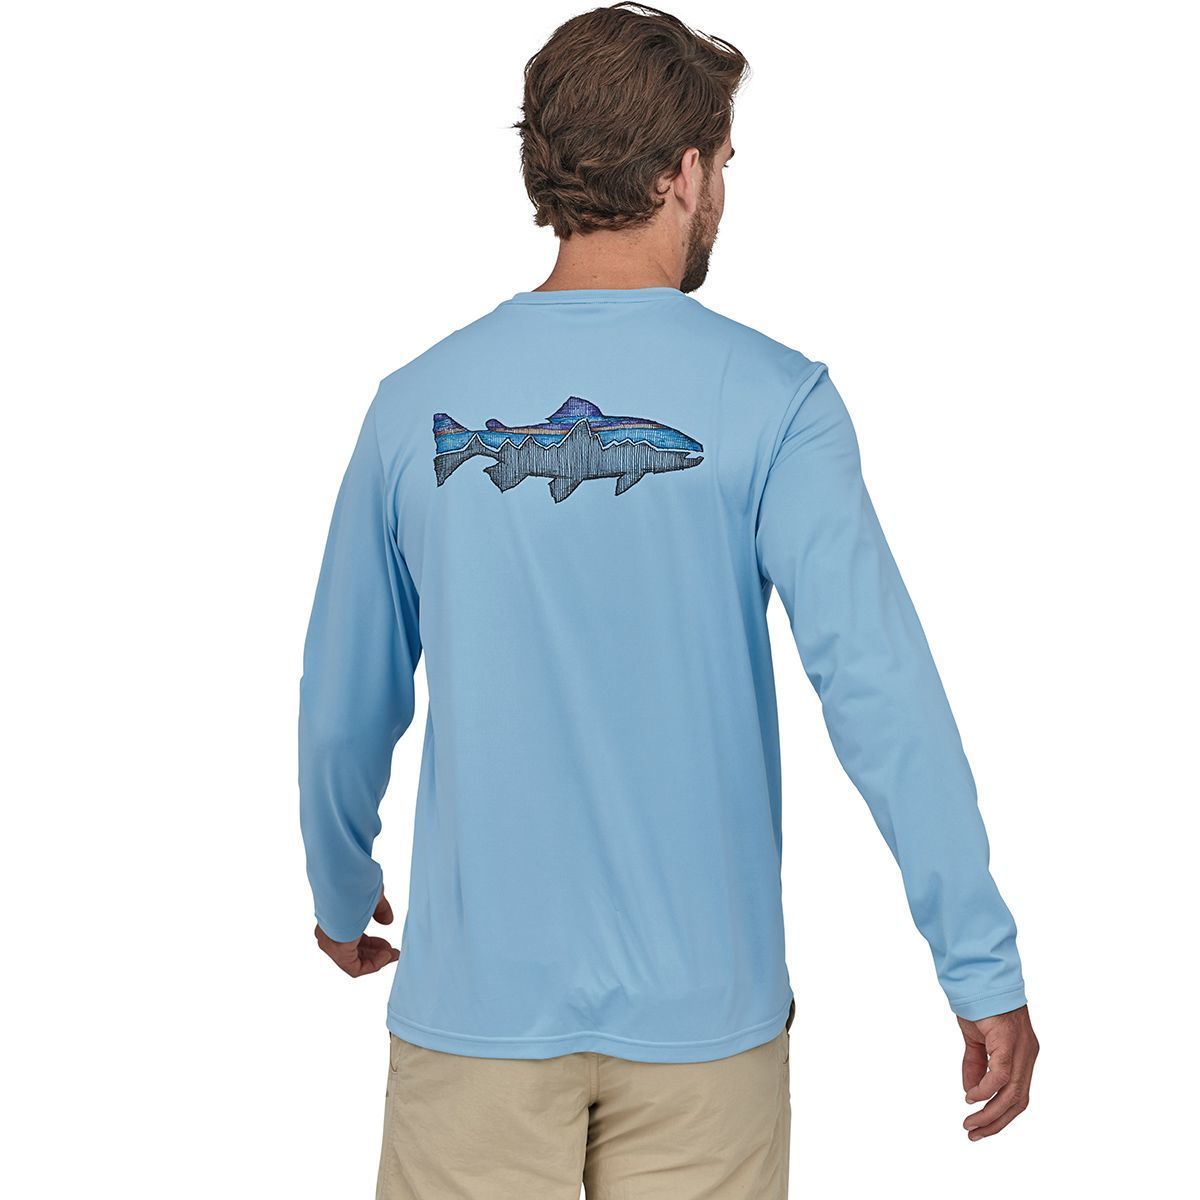 Men's Long-Sleeved Capilene Cool Daily Fish Graphic Shirt - Text